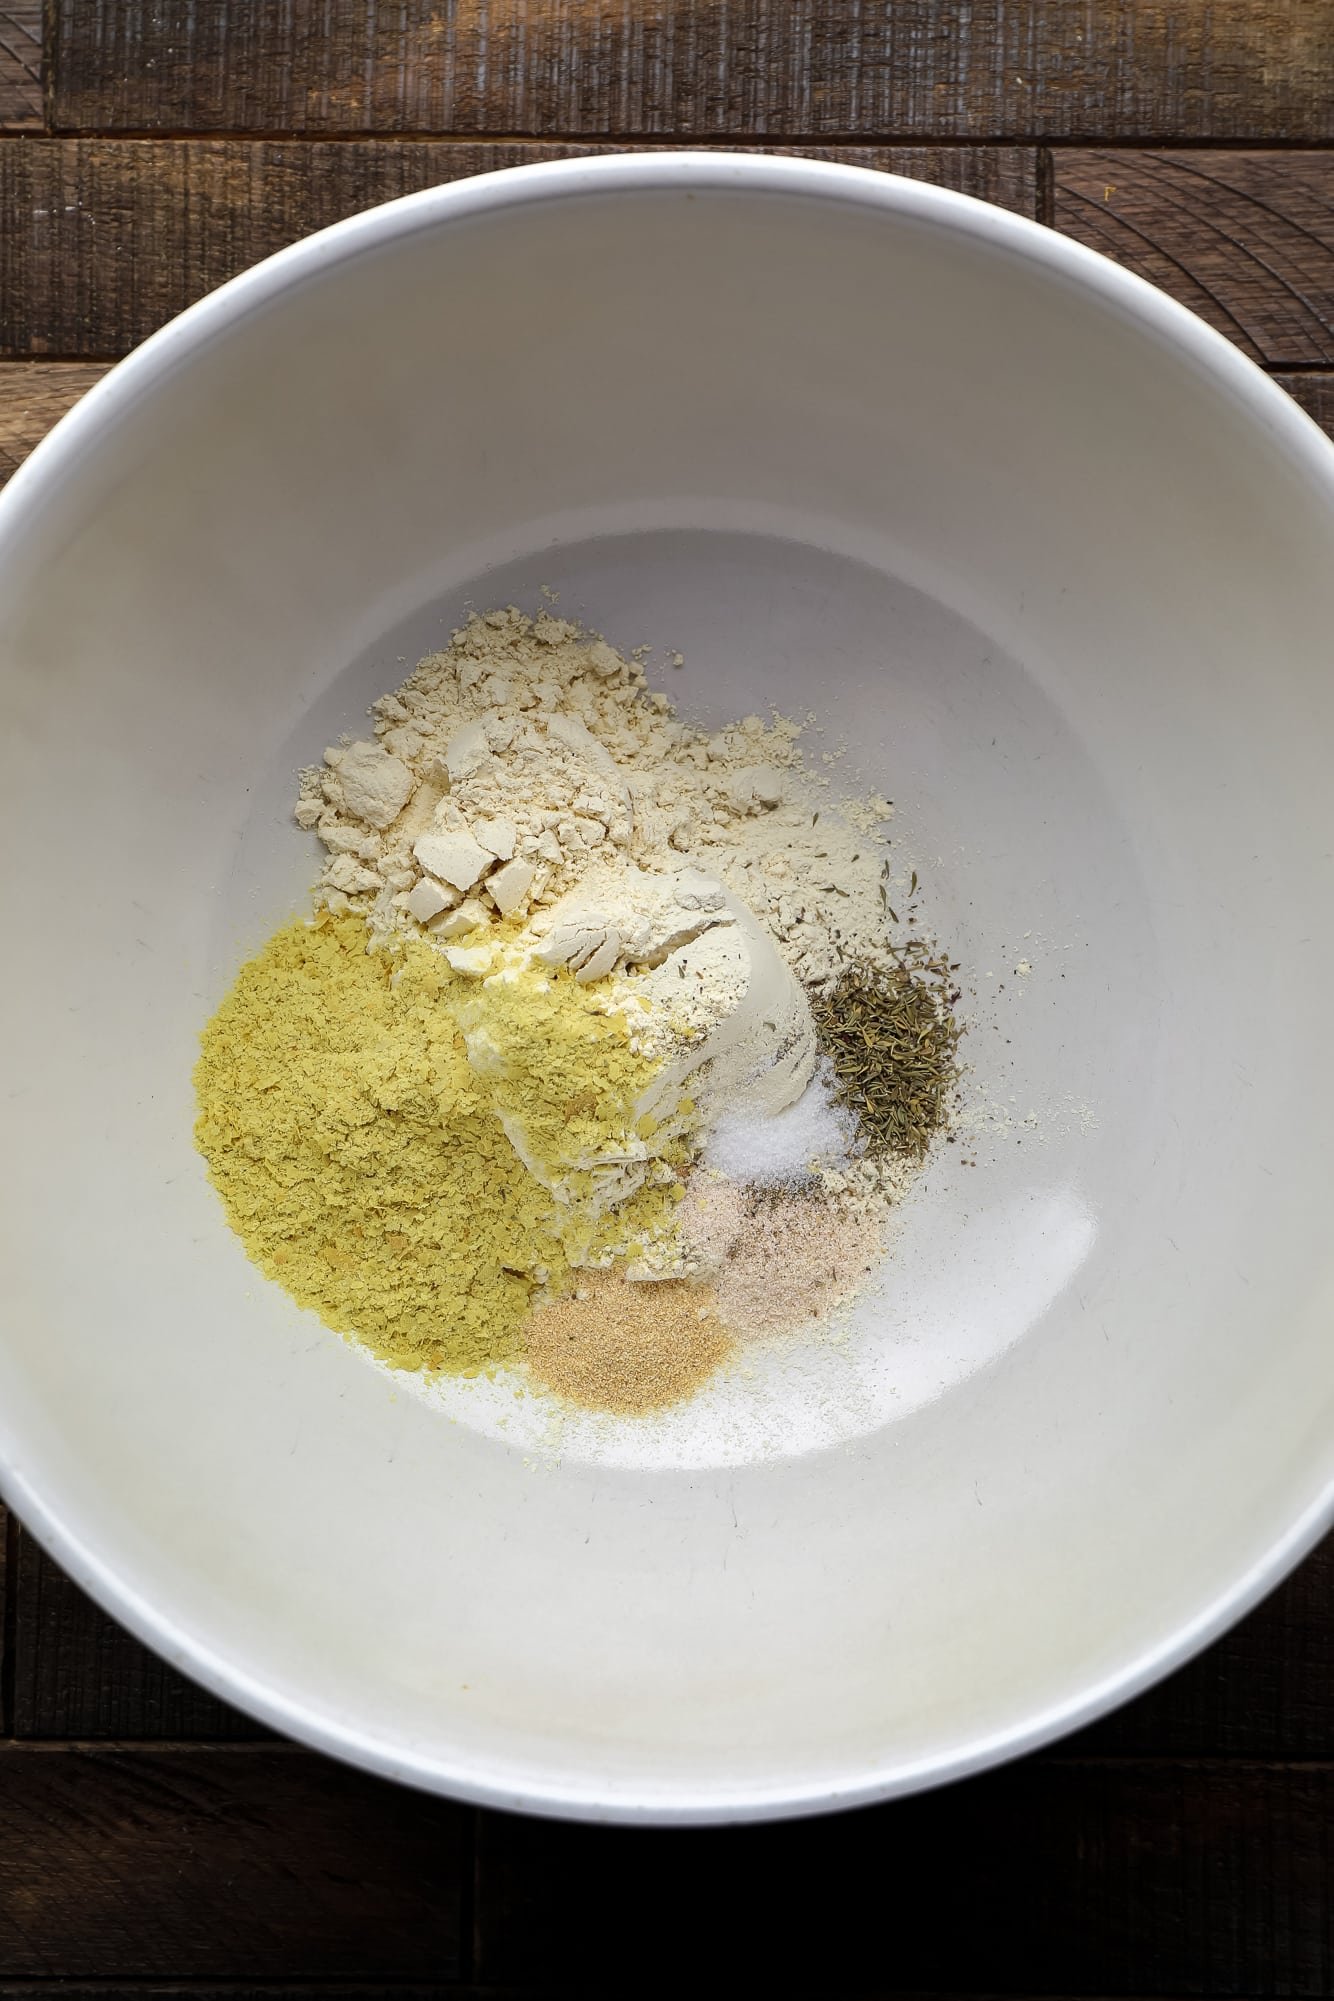 dry ingredients for seitan in a large white bowl.